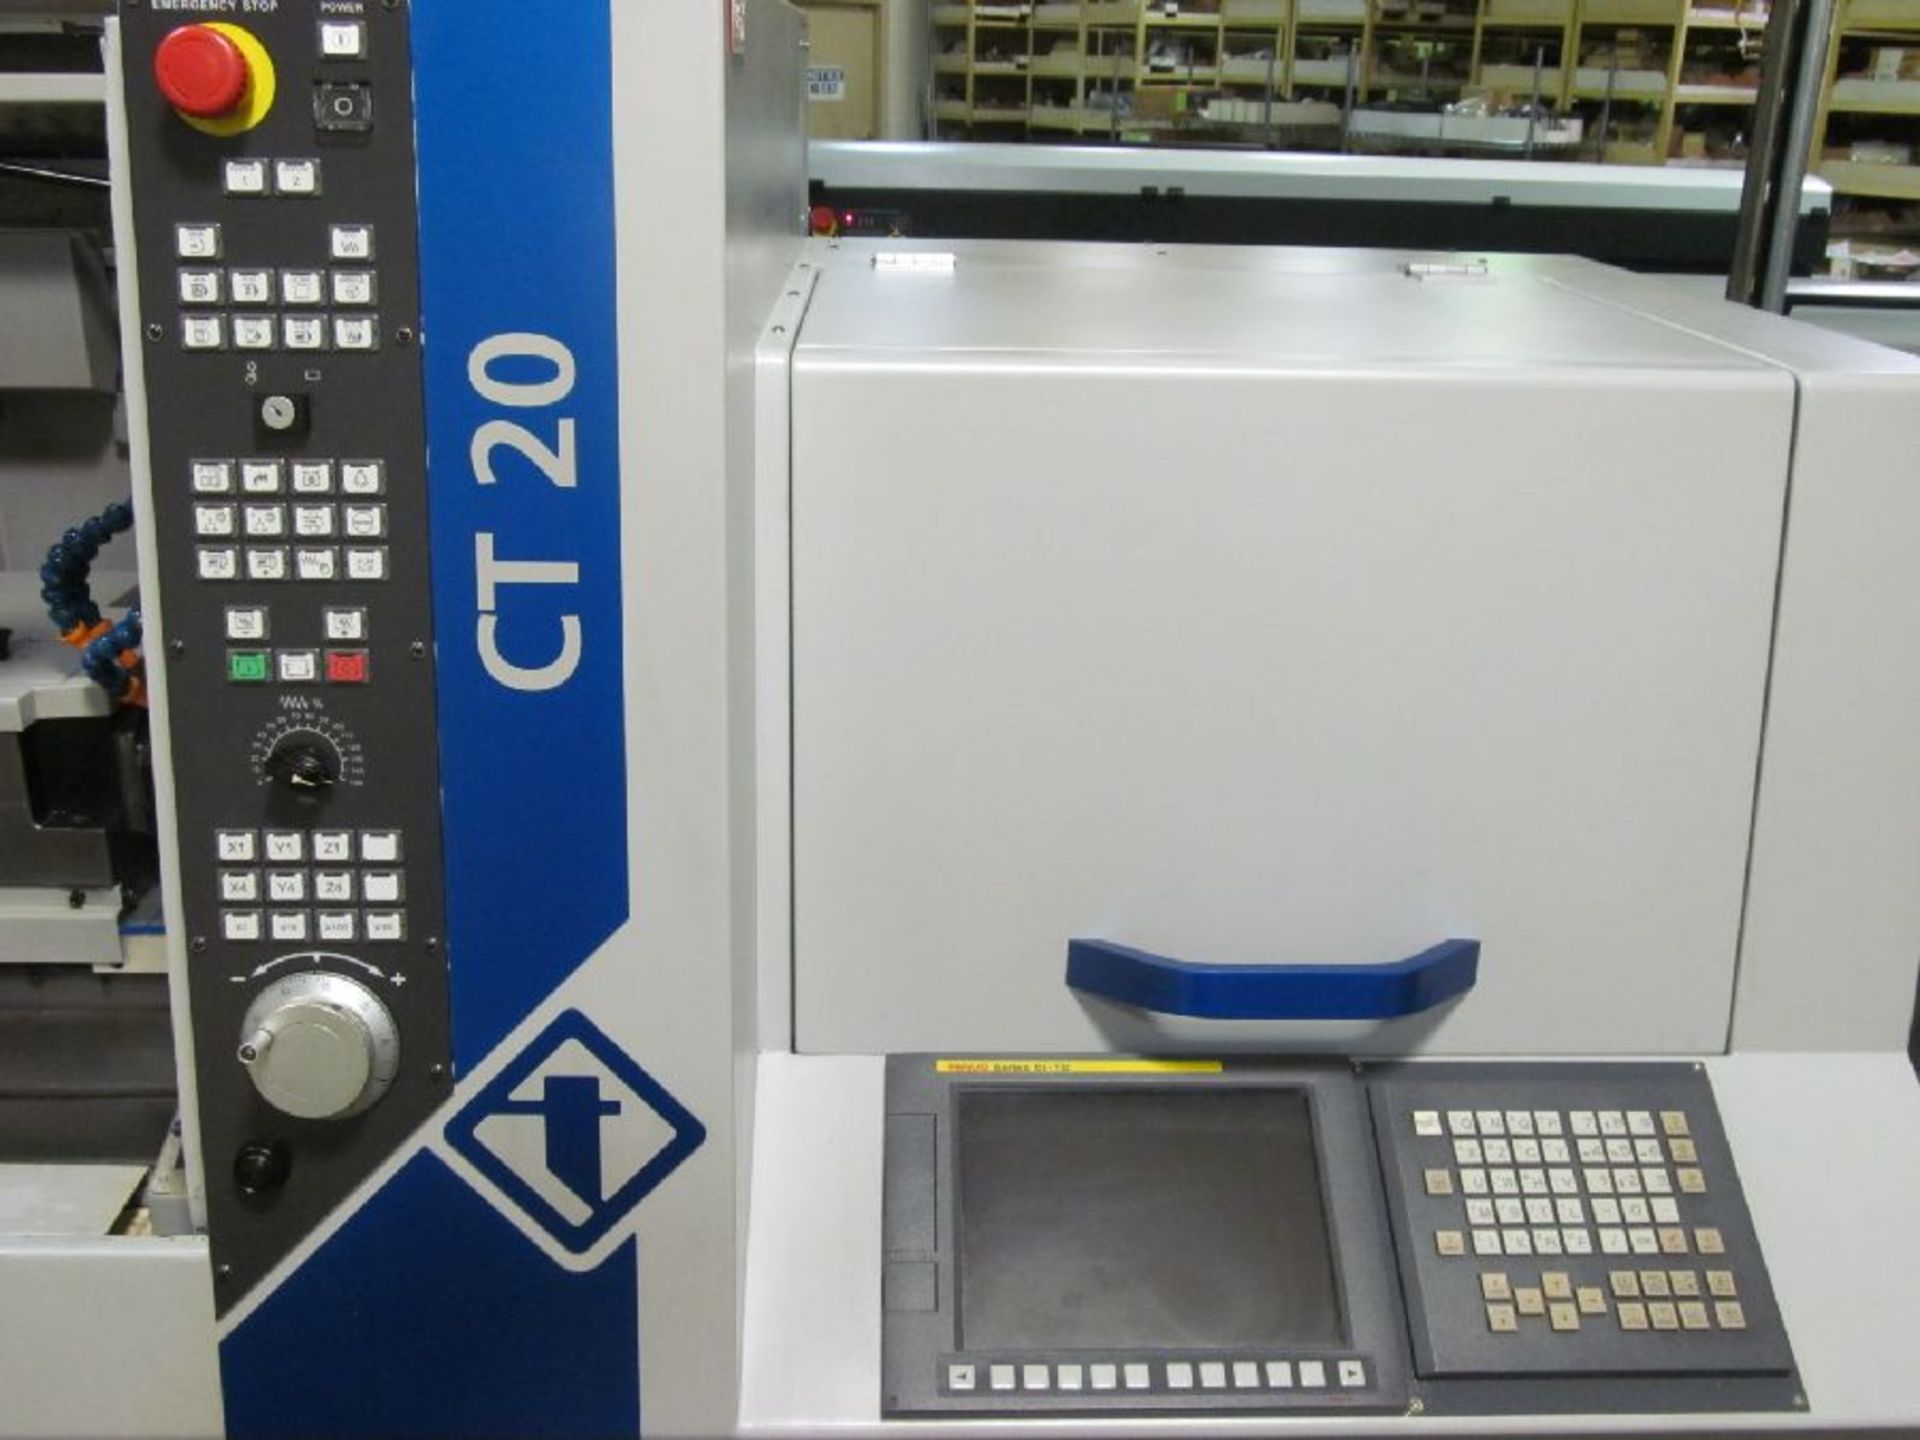 Tornos Model CT 20 7-Axis CNC Swiss-Type Lathe - Image 23 of 25